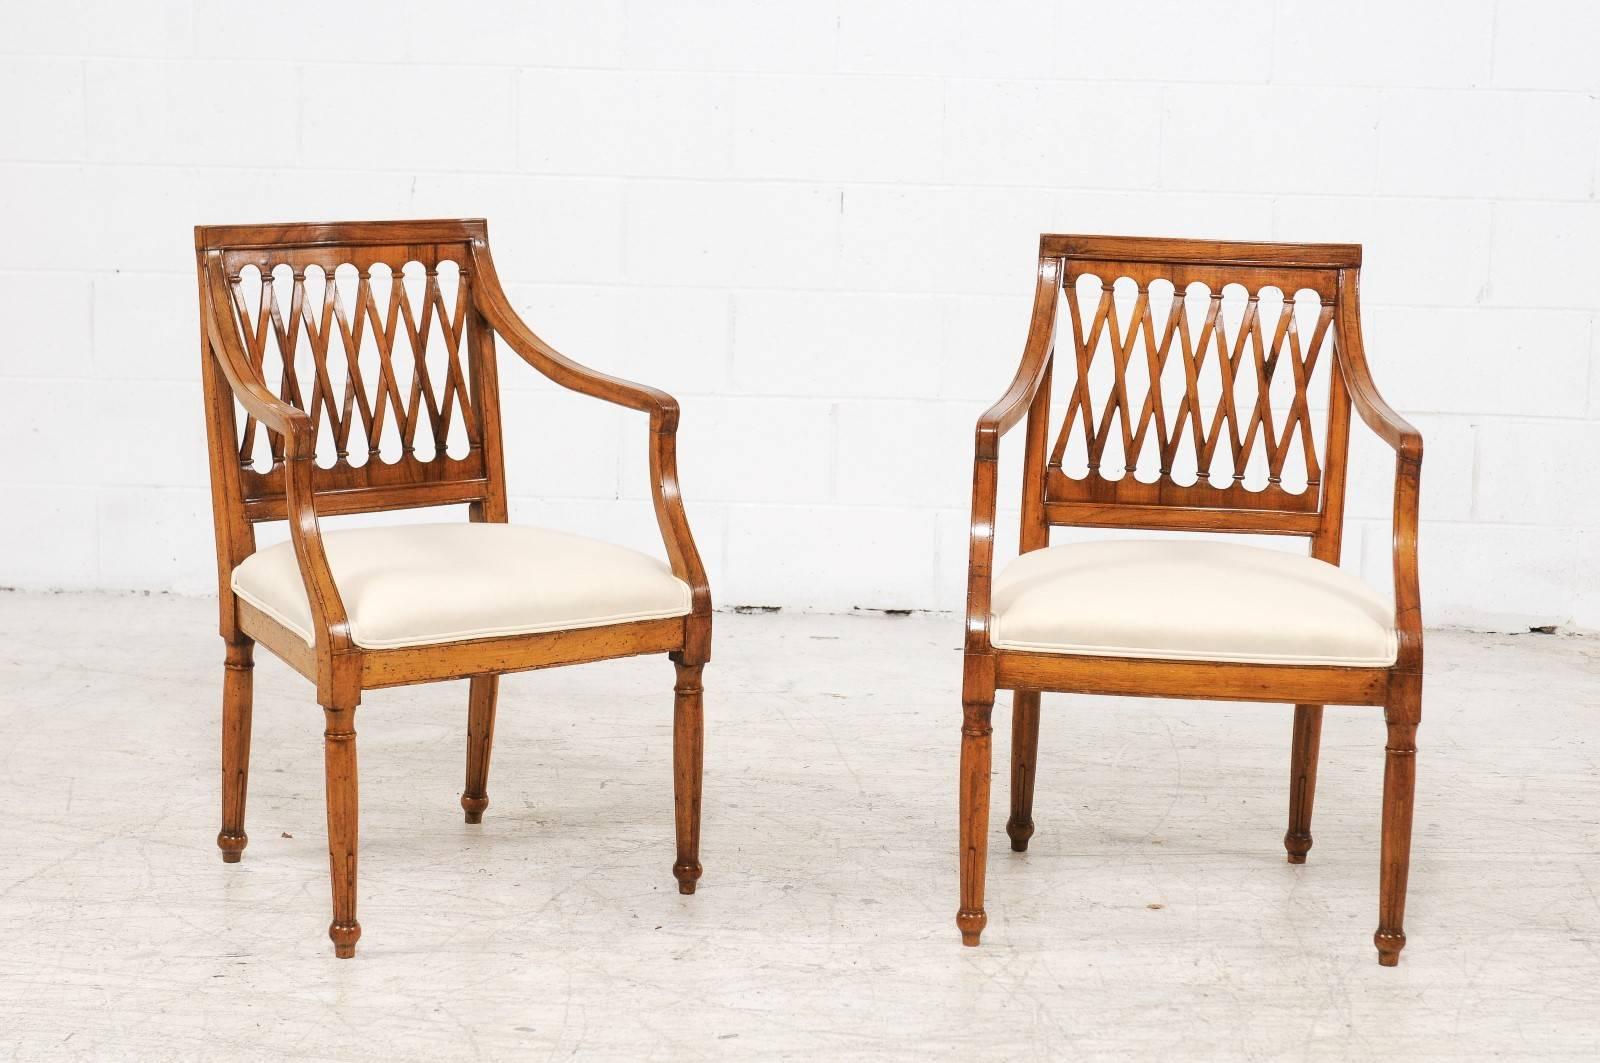 A set of four vintage Italian dining room armchairs with latticed backs, scrolled arms, upholstered seats and cylindrical legs from the first half of the 20th century. Each of this set of Italian chairs features an unusual latticed back flanked with